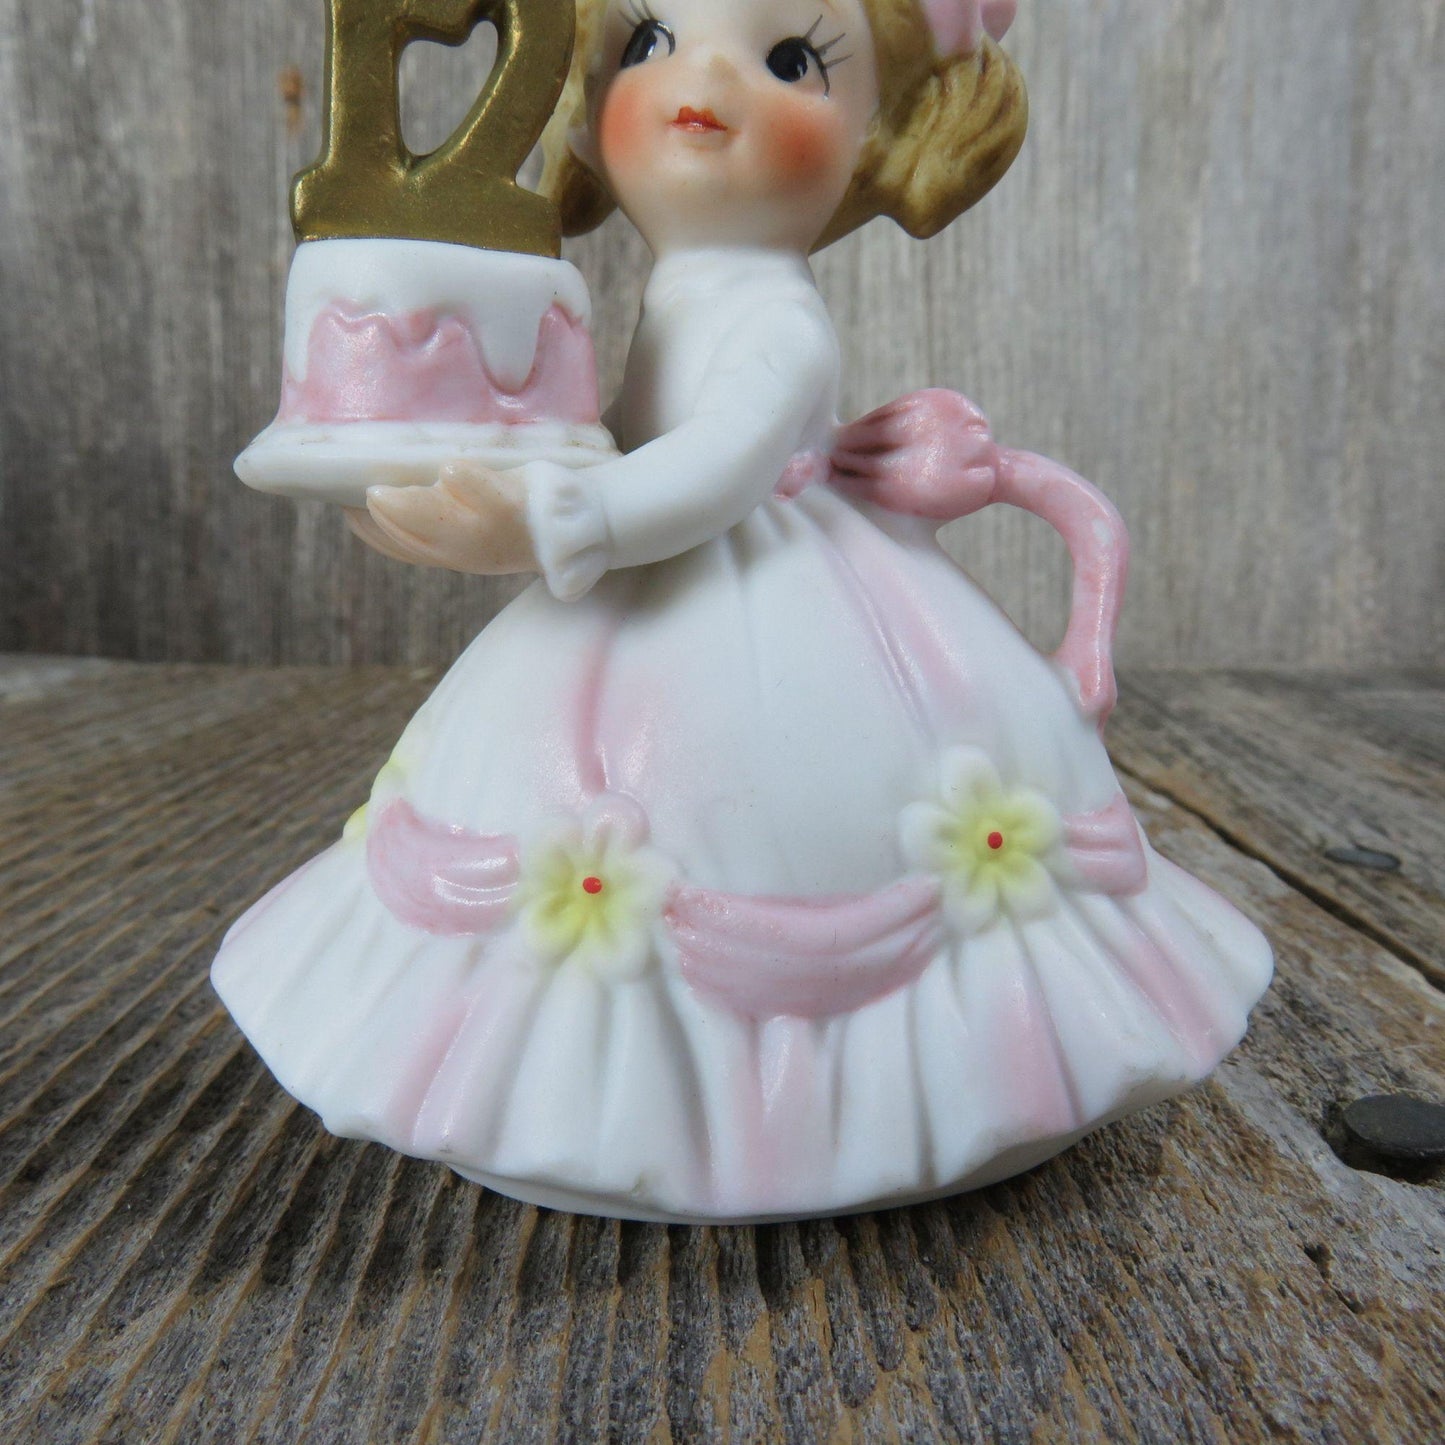 Vintage Birthday Girl Cake Topper Figurine 12th Twelfth Pink Dress Pig Tails Taiwan